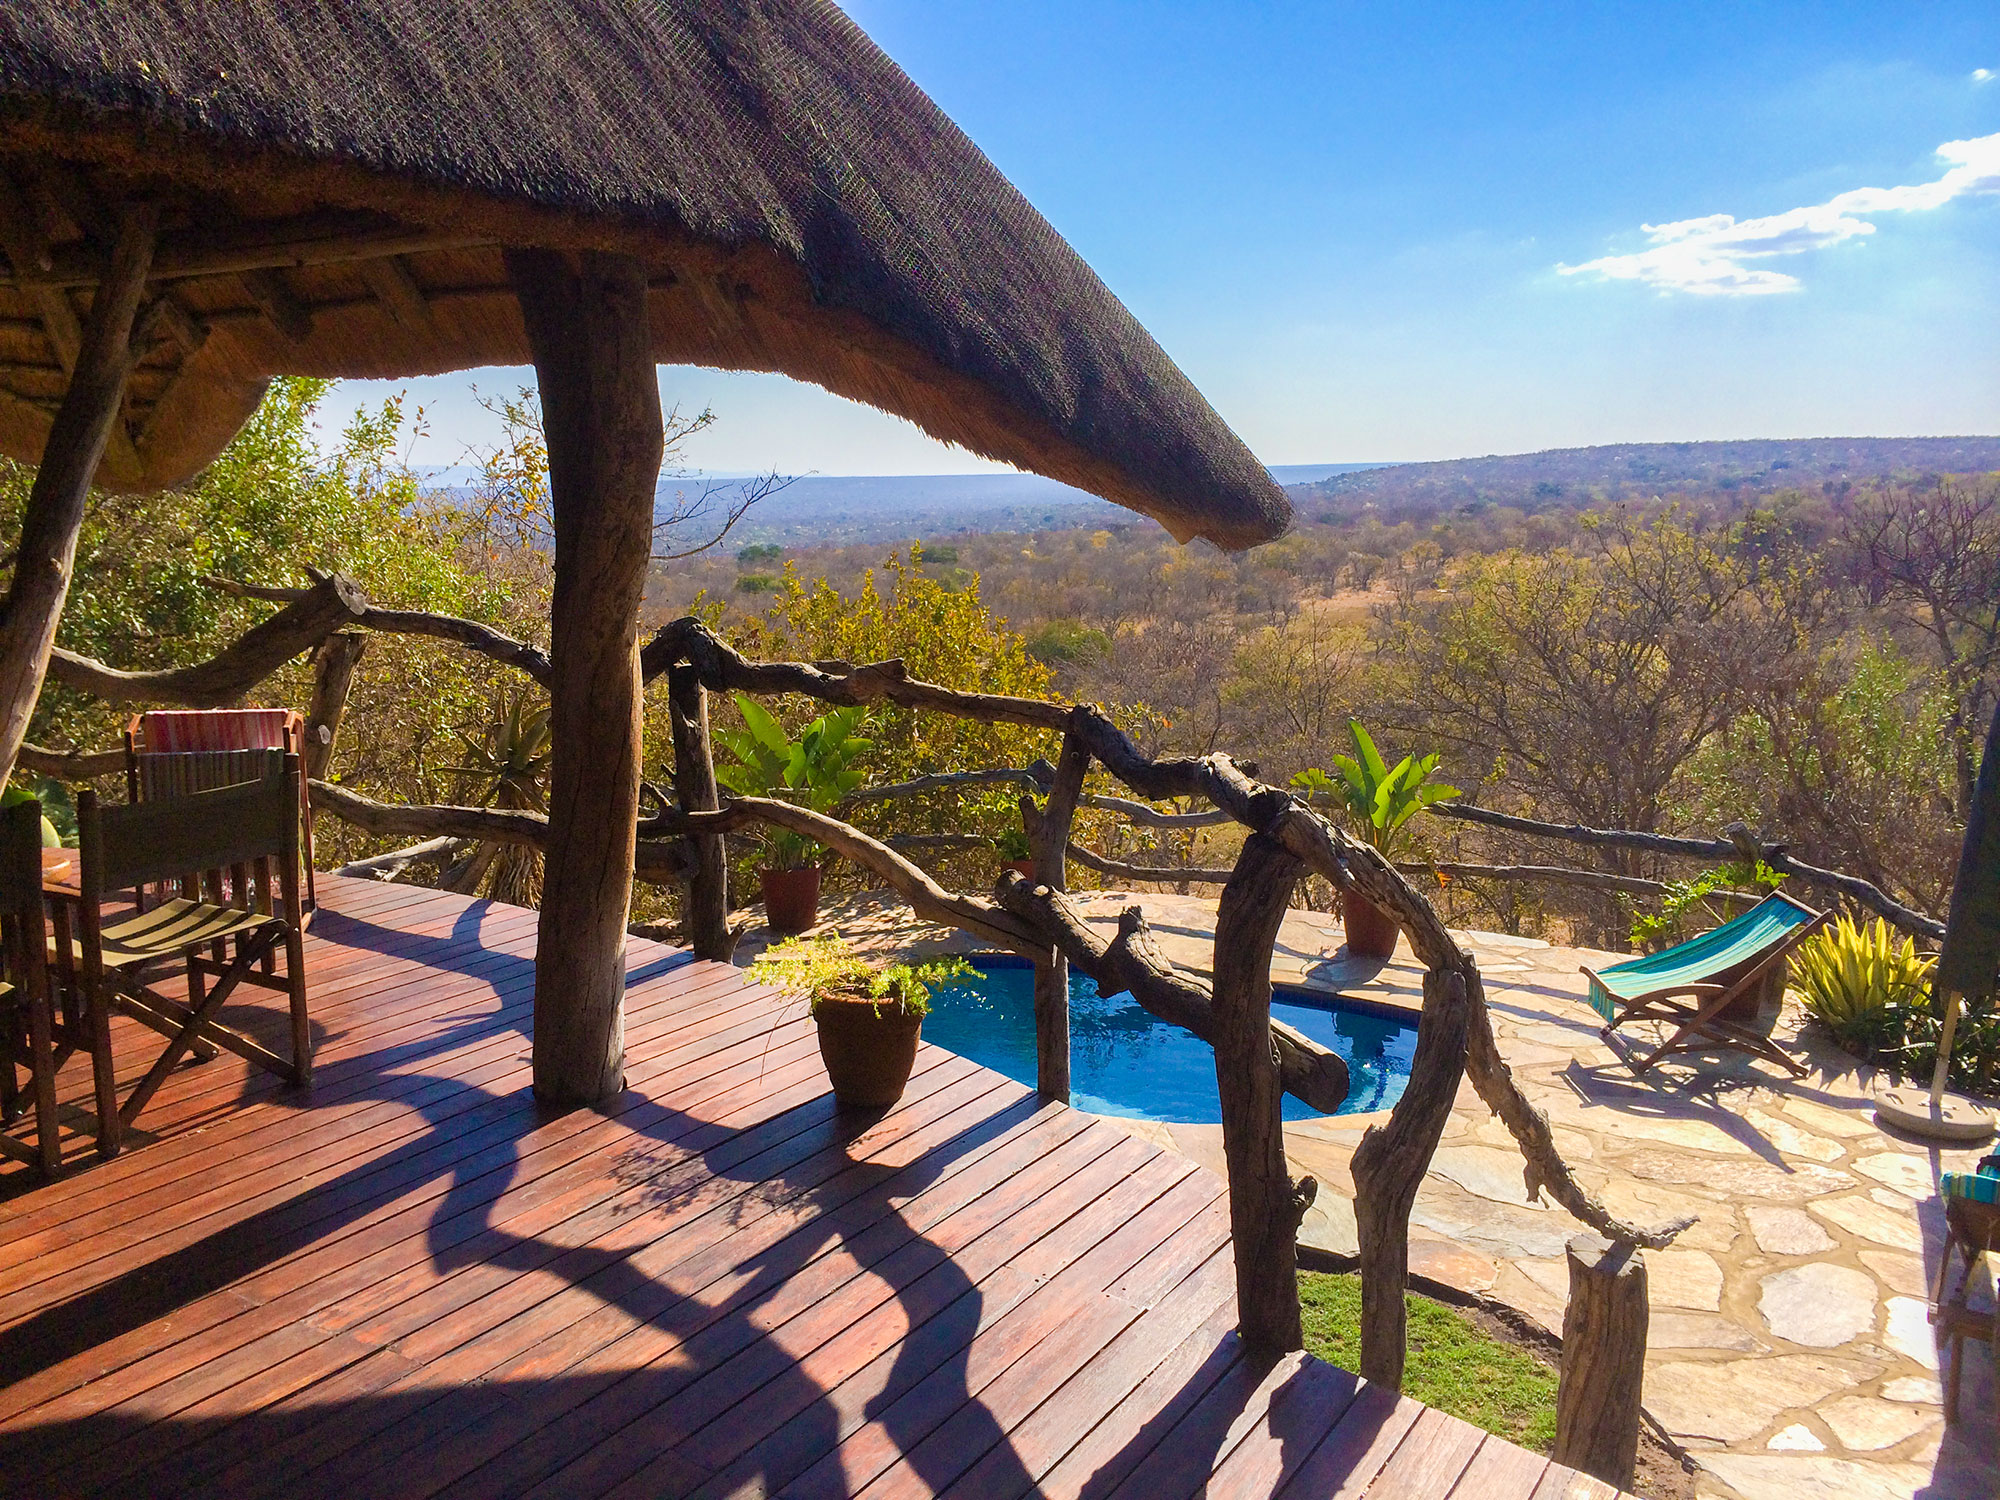 Ant's Nest Safari Lodge in South Africa